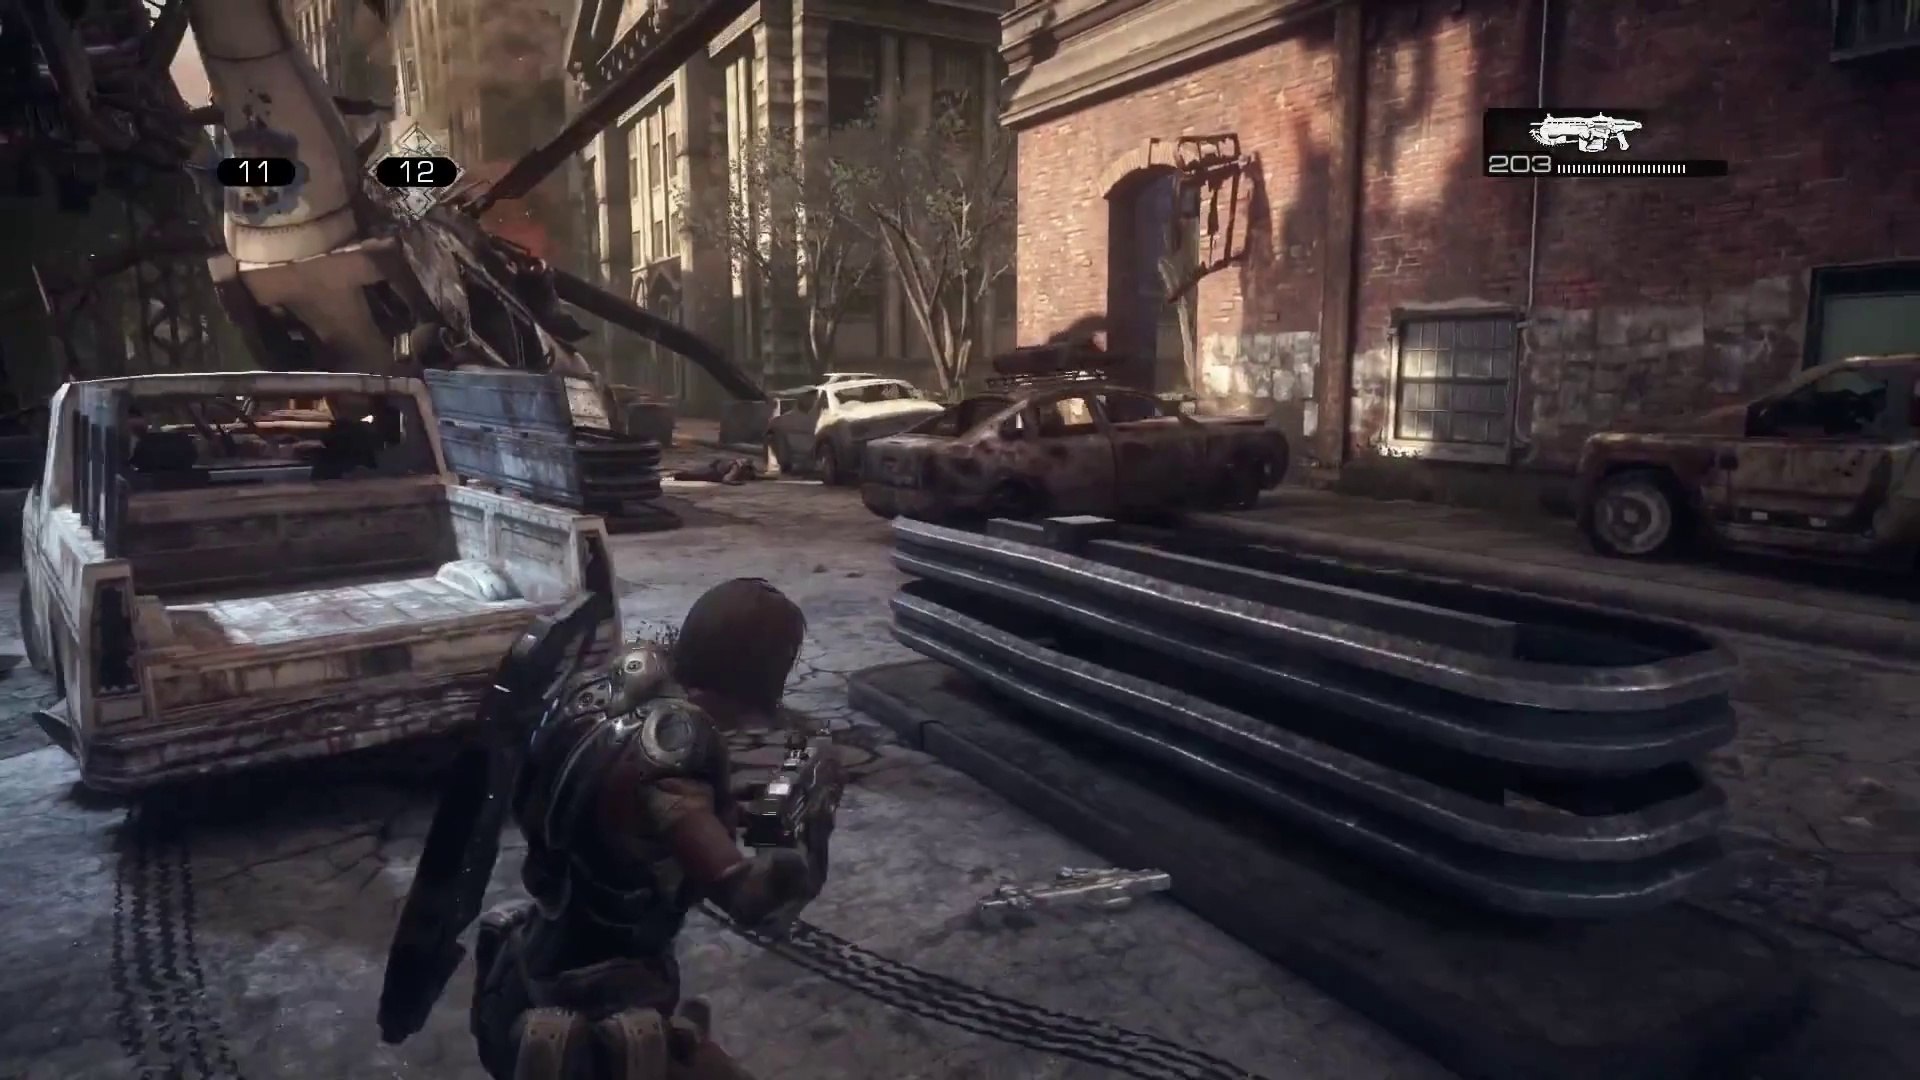 Gears of War: Ultimate Edition VS Gears of War 3! (Multiplayer Gameplay) 